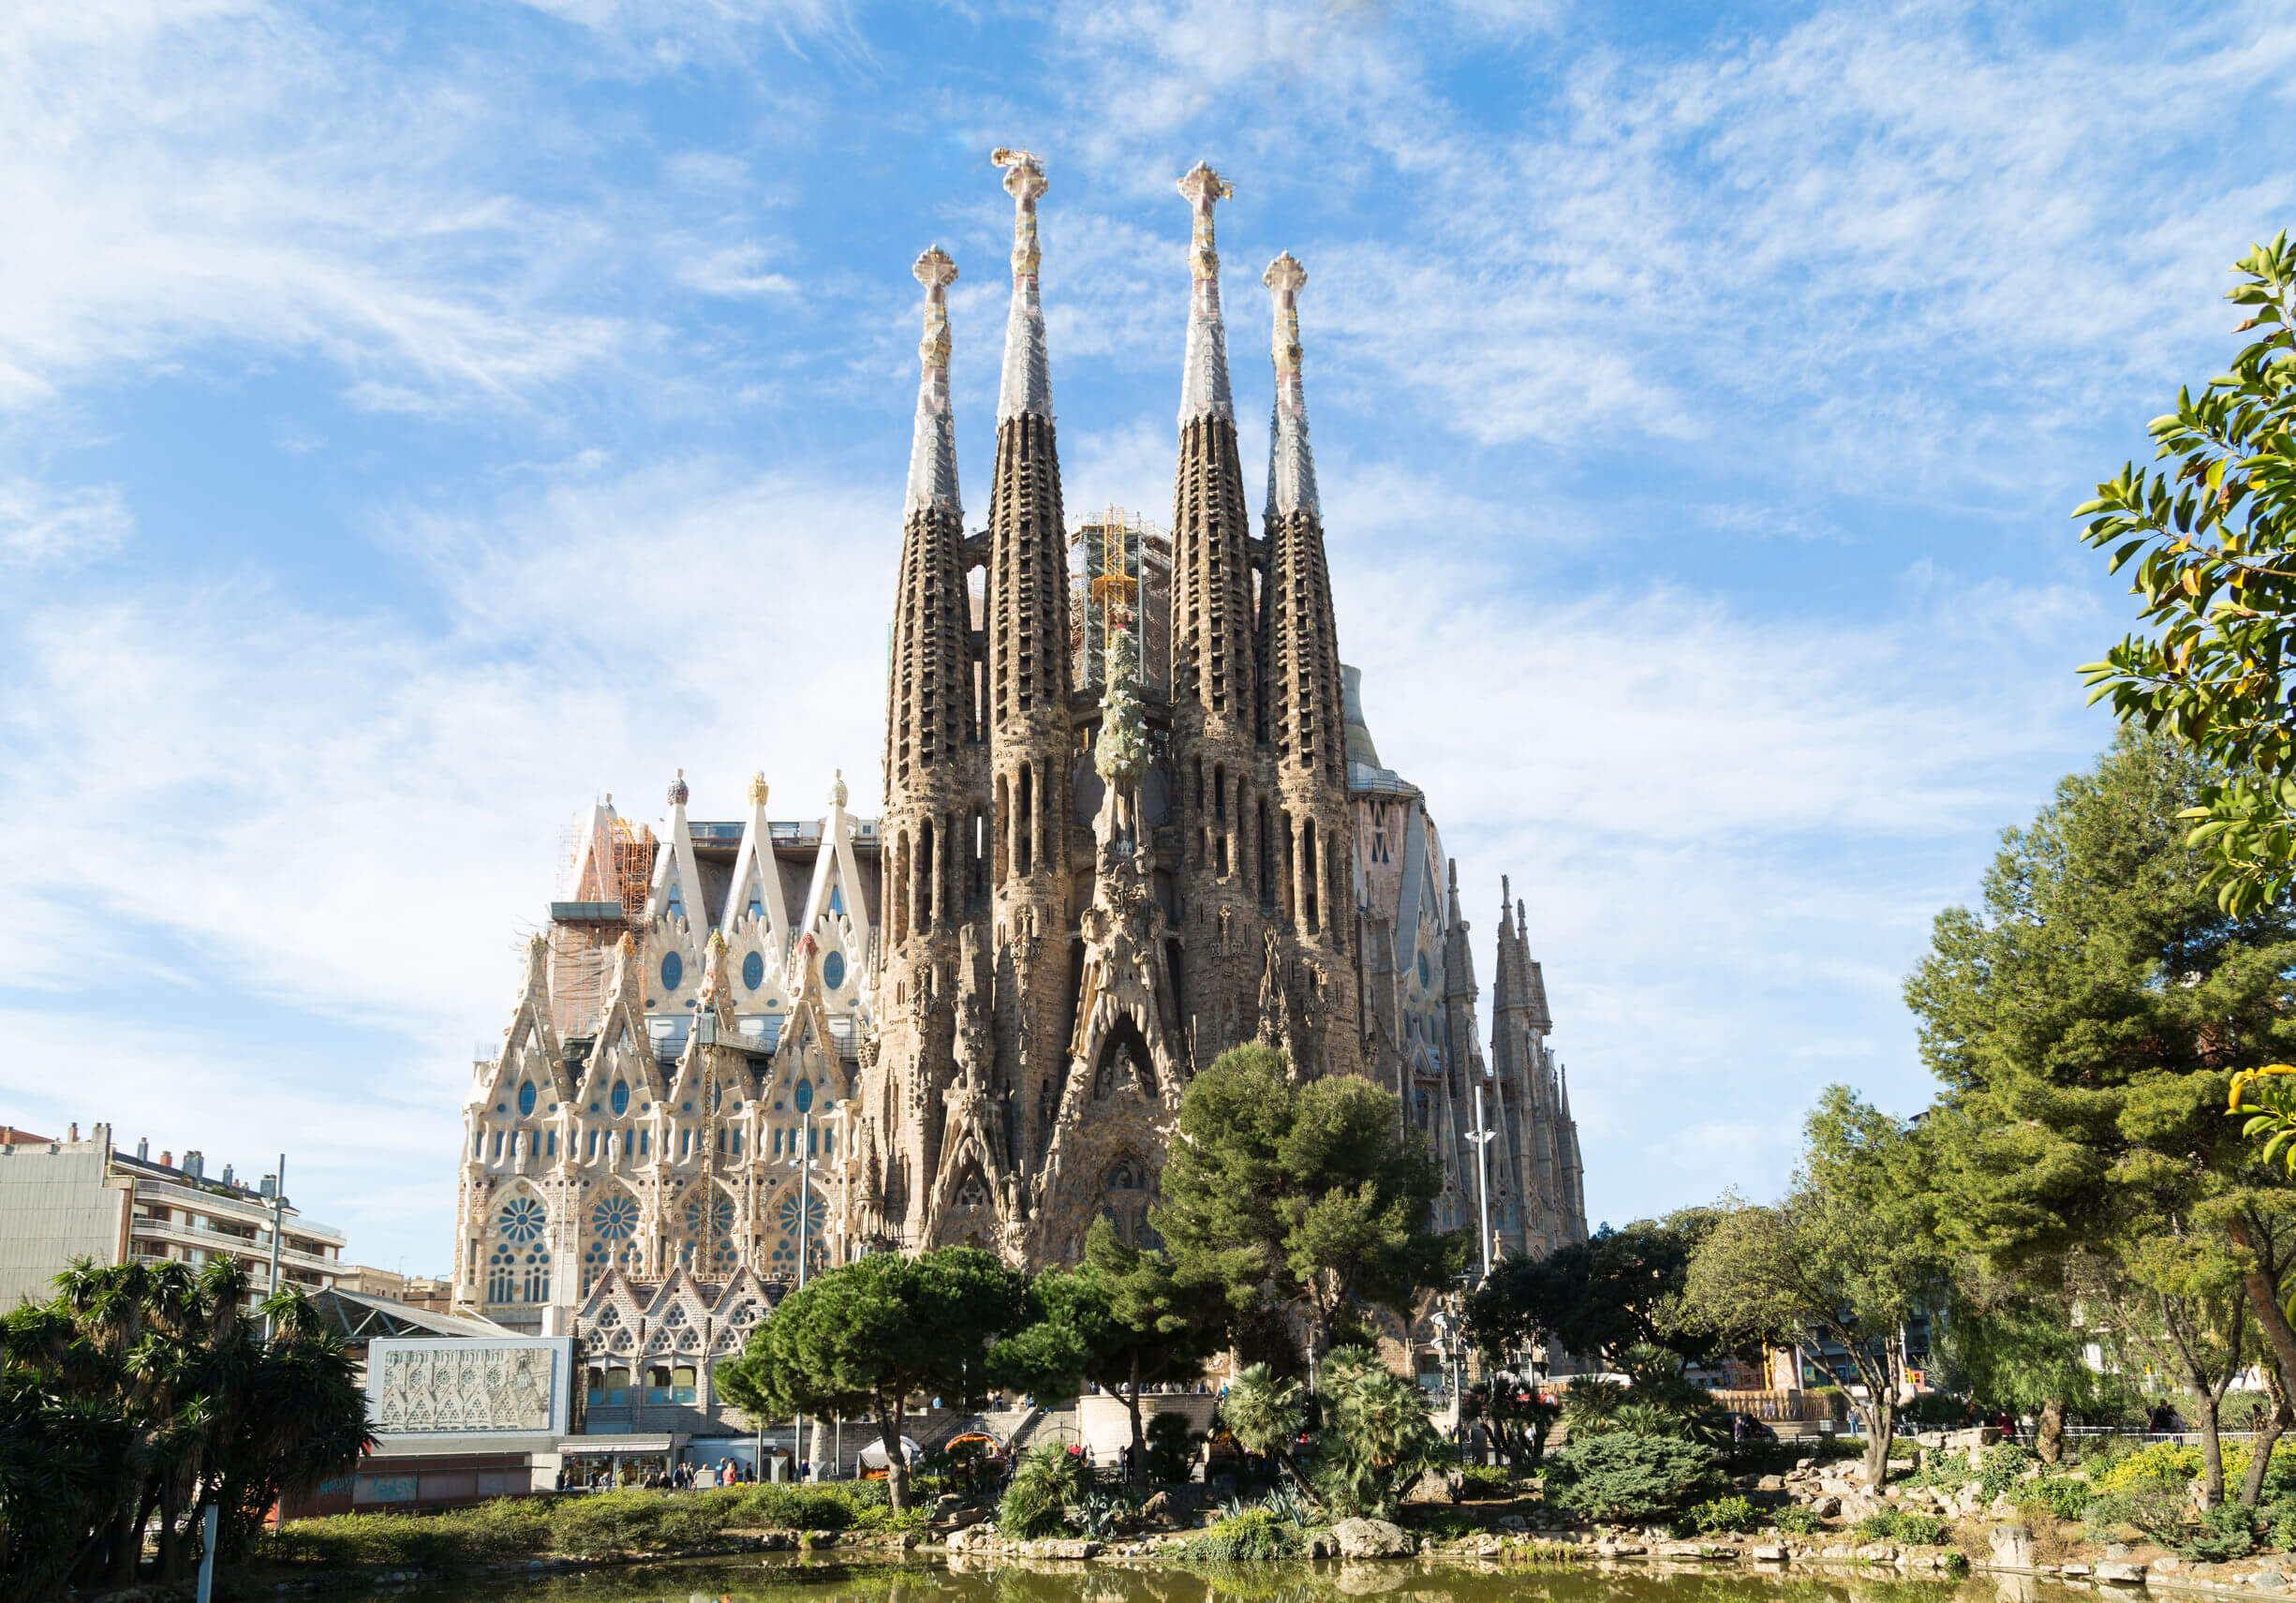 BARCELONA, SPAIN -MARCH 06: Sagrada Familia on MARCH 06, 2015: La Sagrada Familia - the impressive cathedral designed by architect Gaudi, which is being build since March 19, 1882 and is not finished.